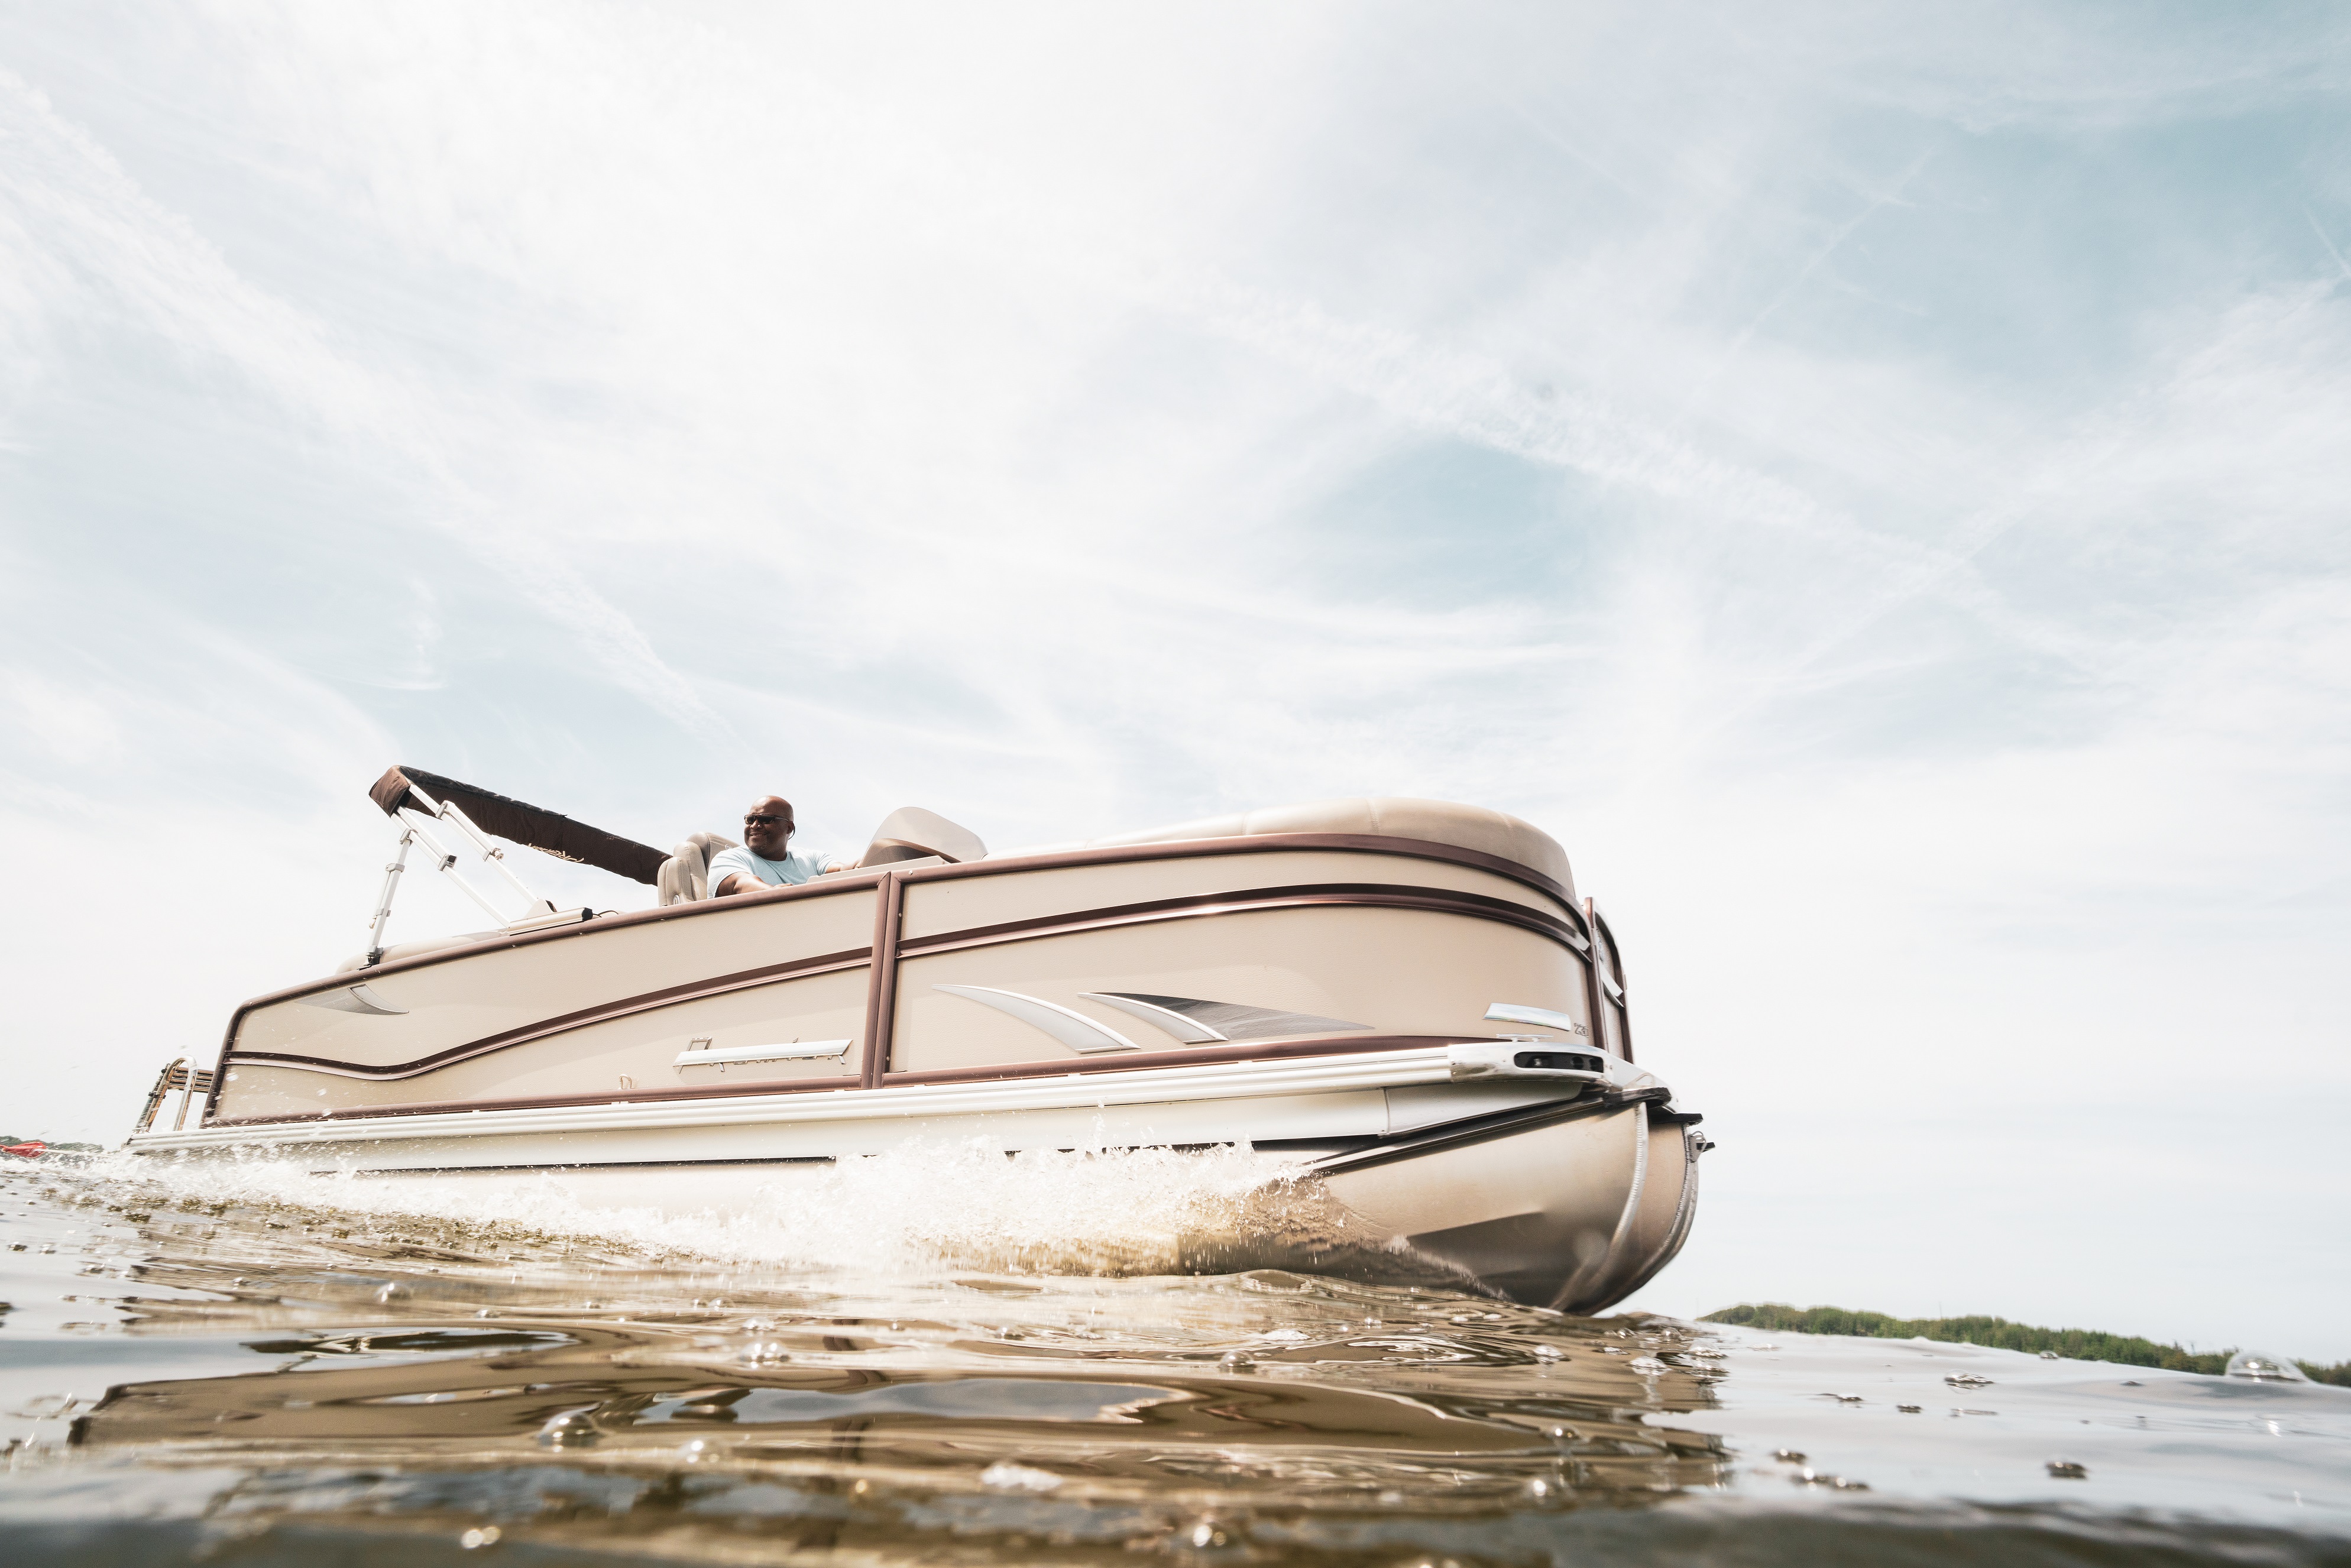 Report: Recreational Boating Boom Continues as Americans Turn to the Water  in the Wake of COVID-19 Pandemic